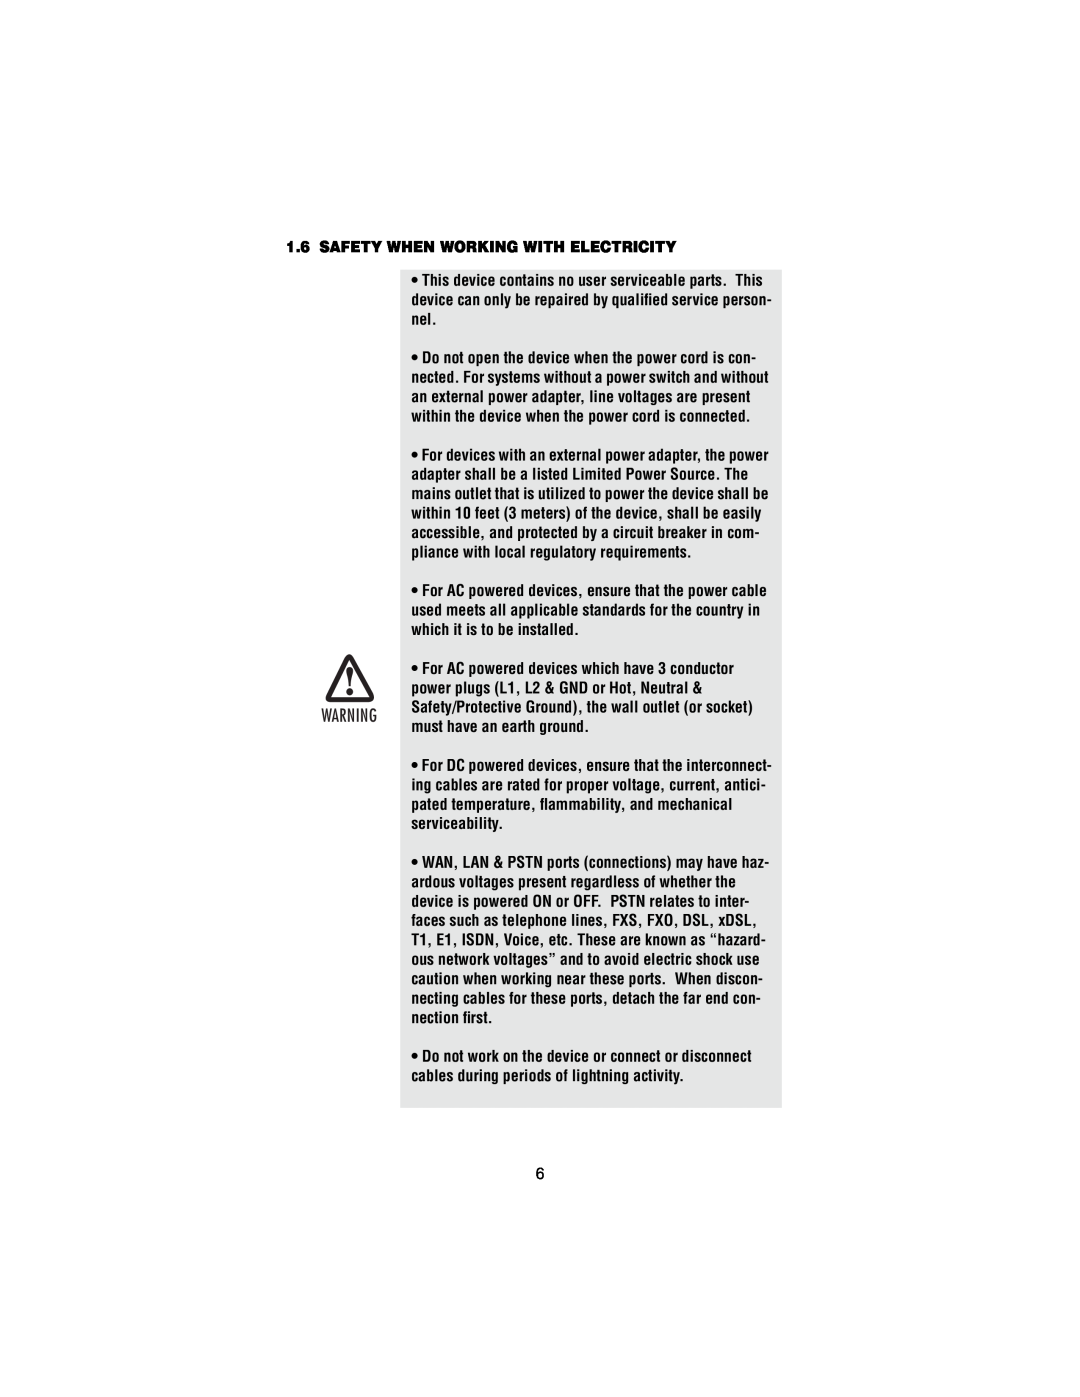 Patton electronic 2158B user manual Safety When Working With Electricity, For AC powered devices which have 3 conductor 